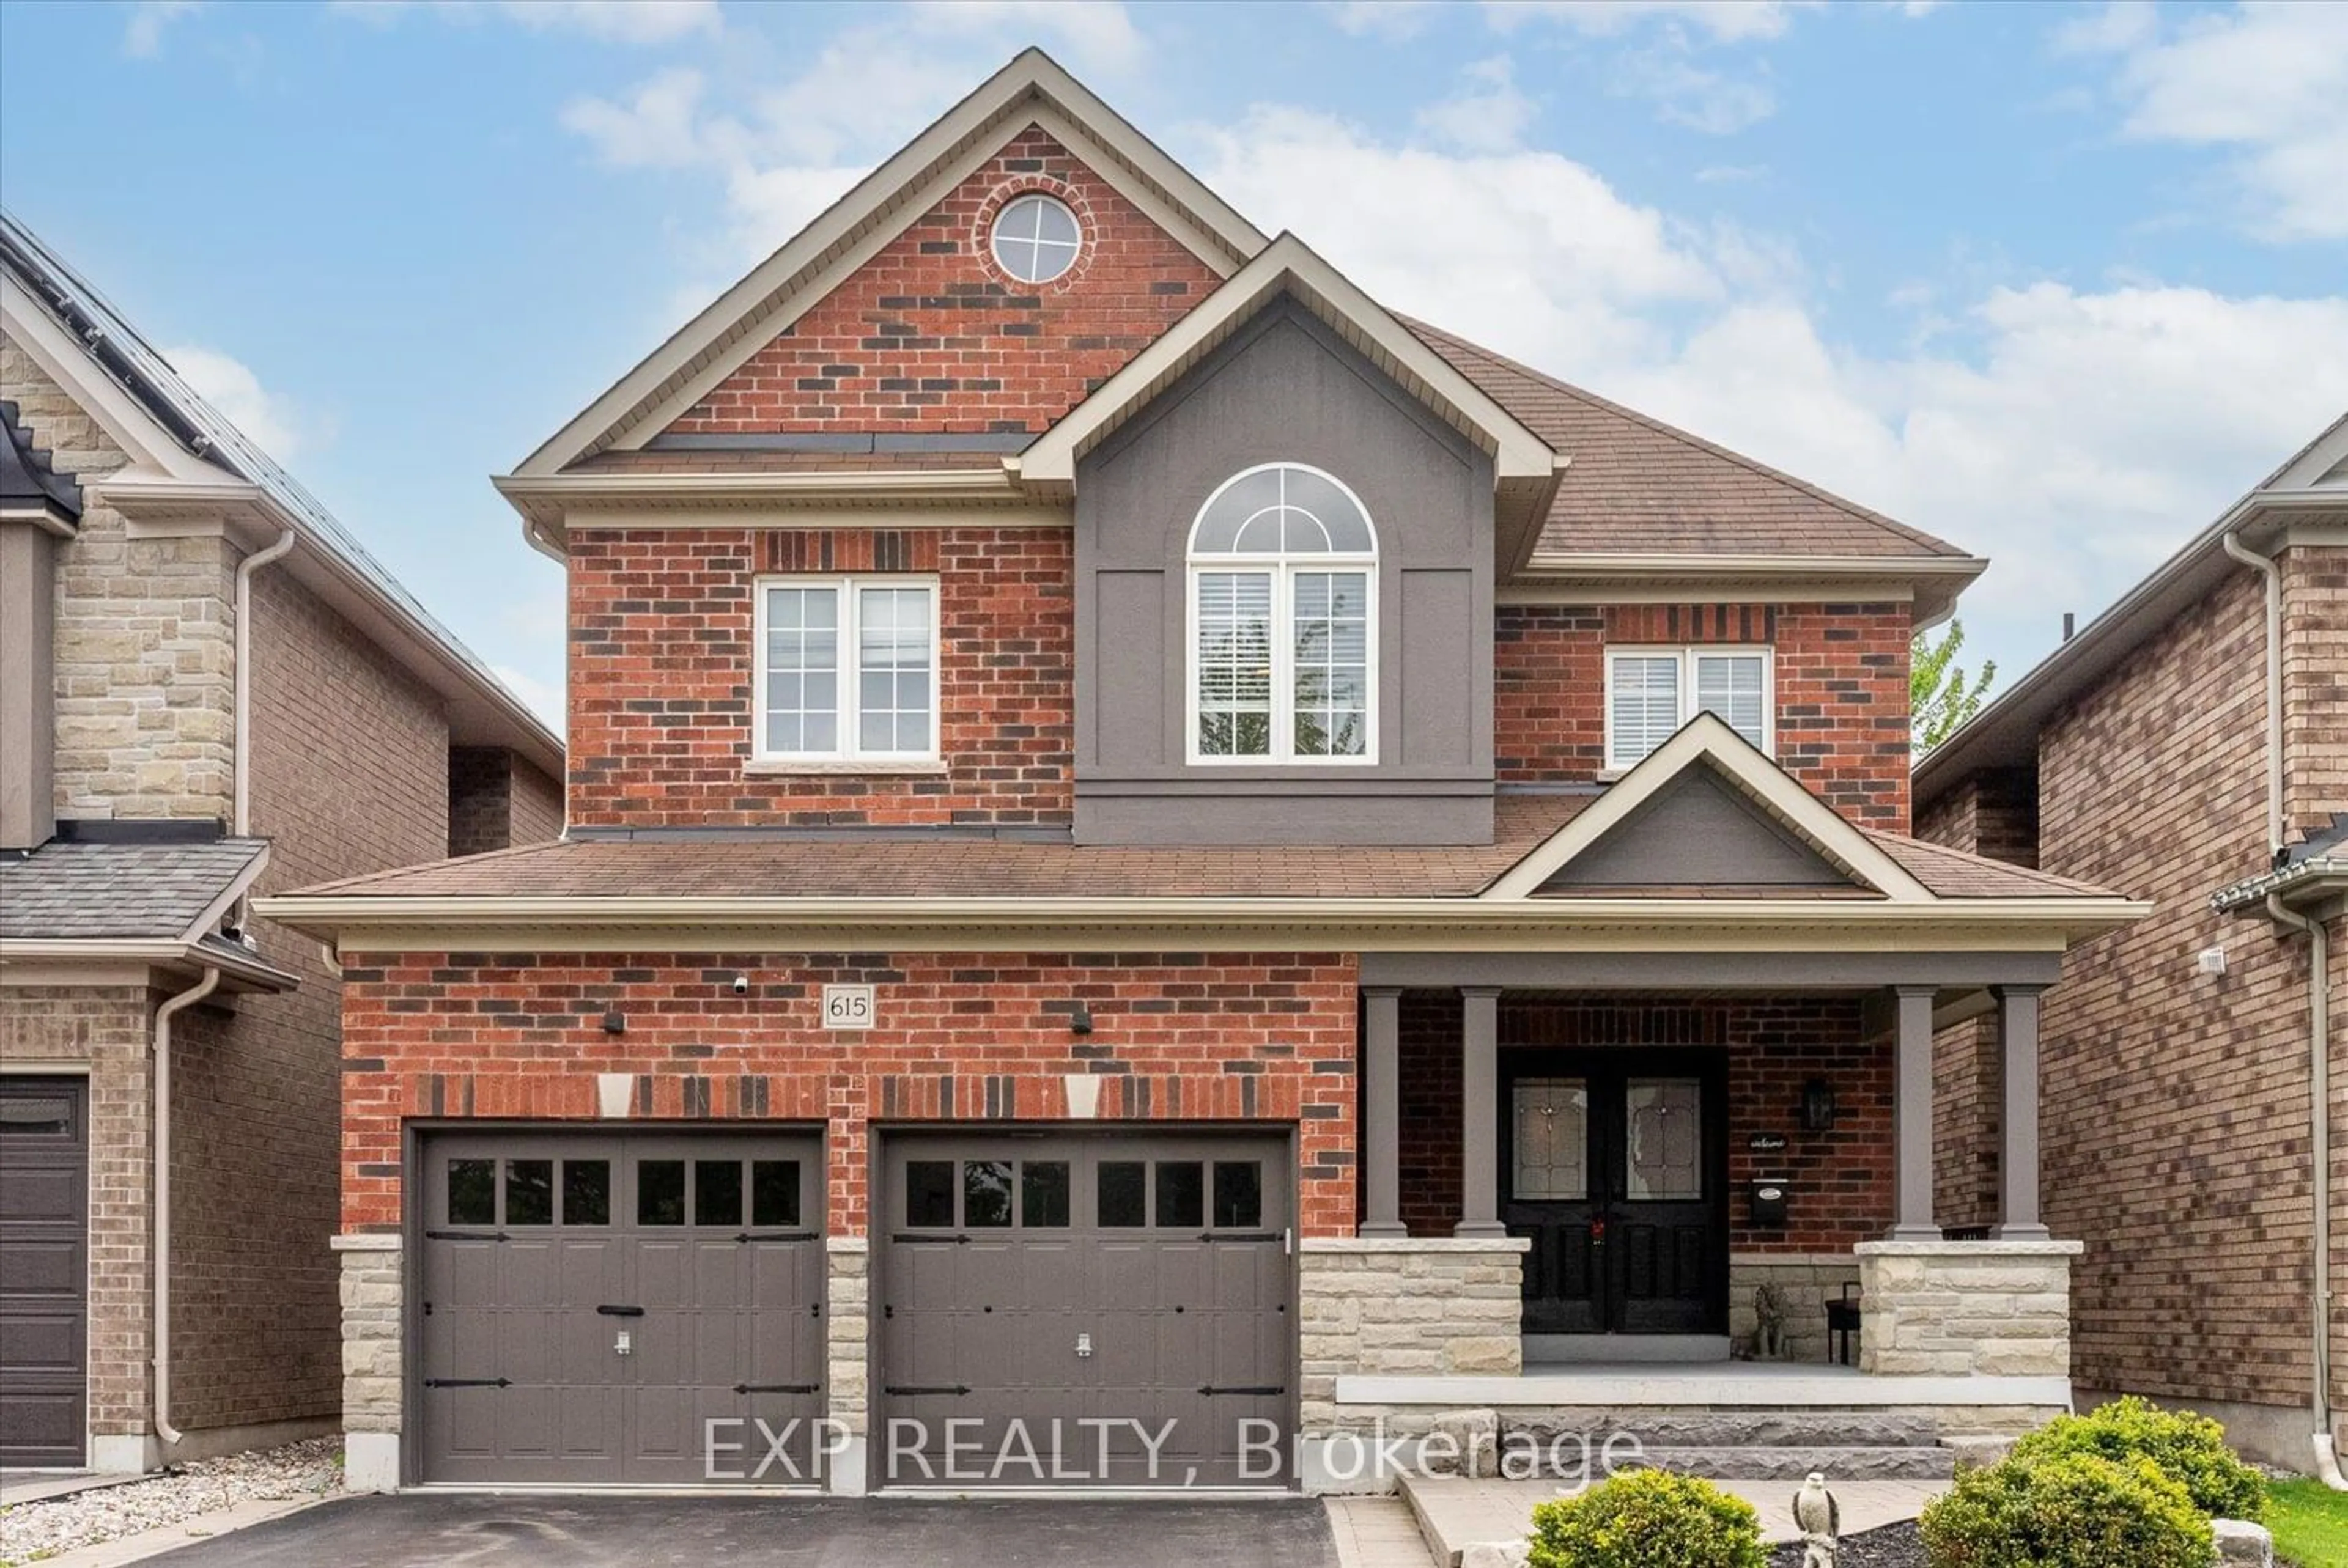 Home with brick exterior material for 615 Fairglen Ave, Oshawa Ontario L1J 0A7